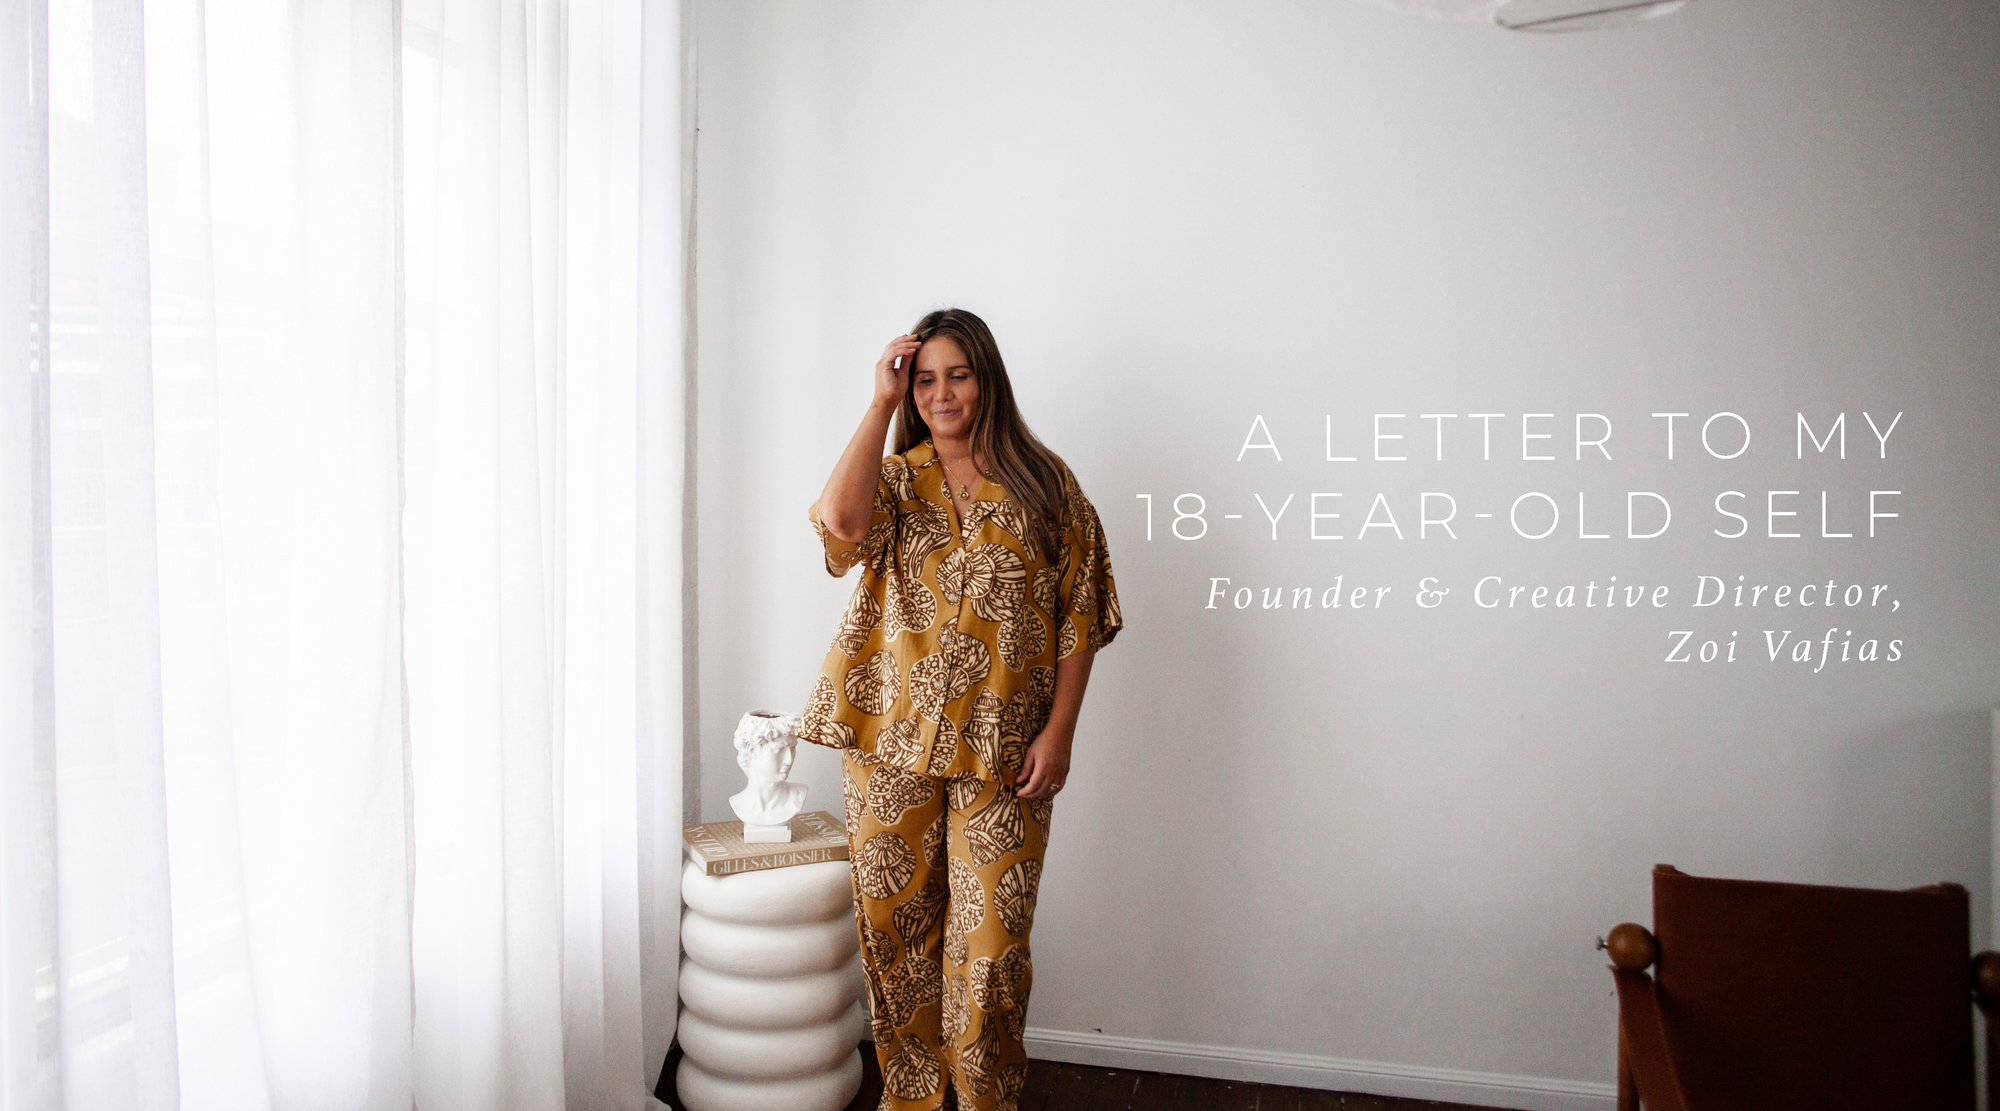 Our Founder's letter to her younger self